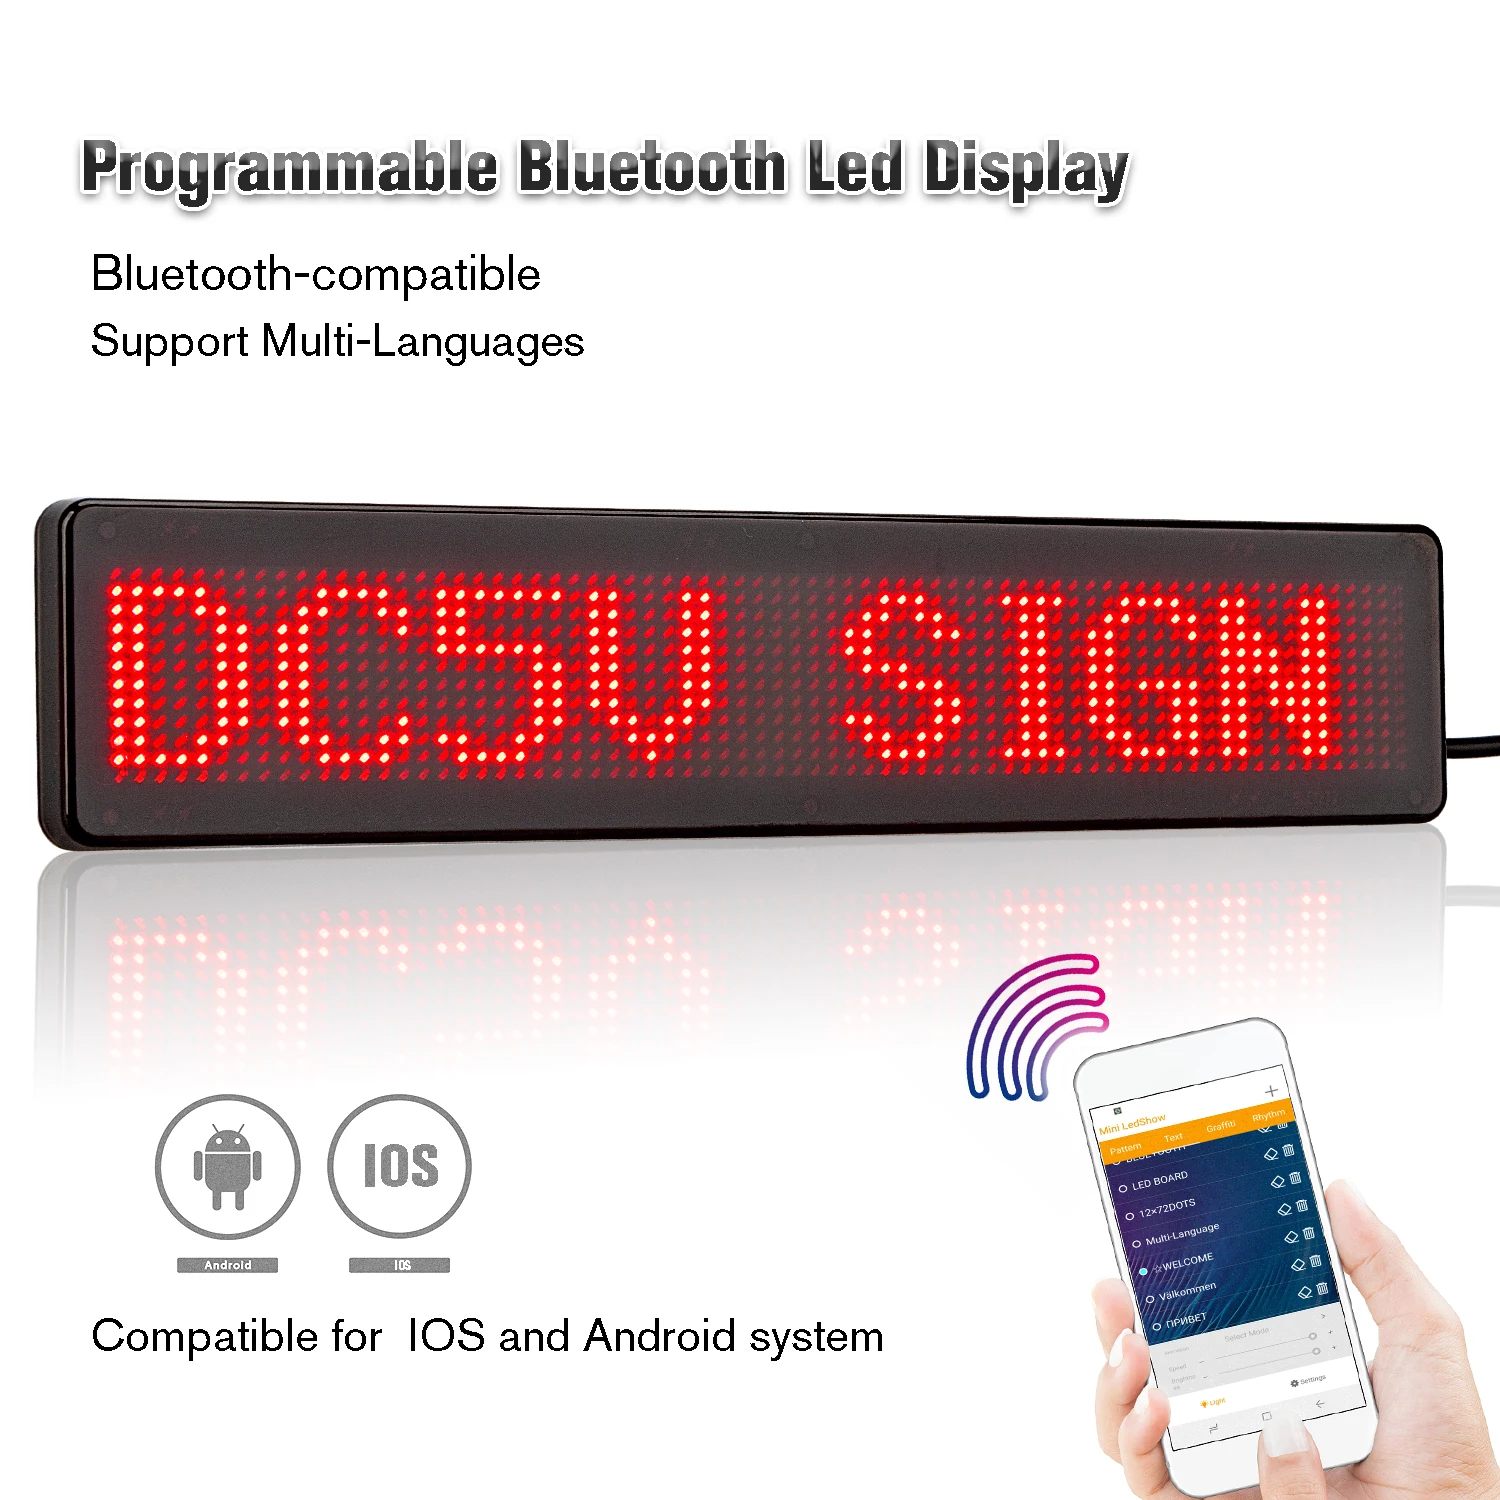 DC5V Bluetooth-Compatible LED Display Car Sign APP Control Programmable Scrolling Message Board LED Screen Multi-Language 23CM